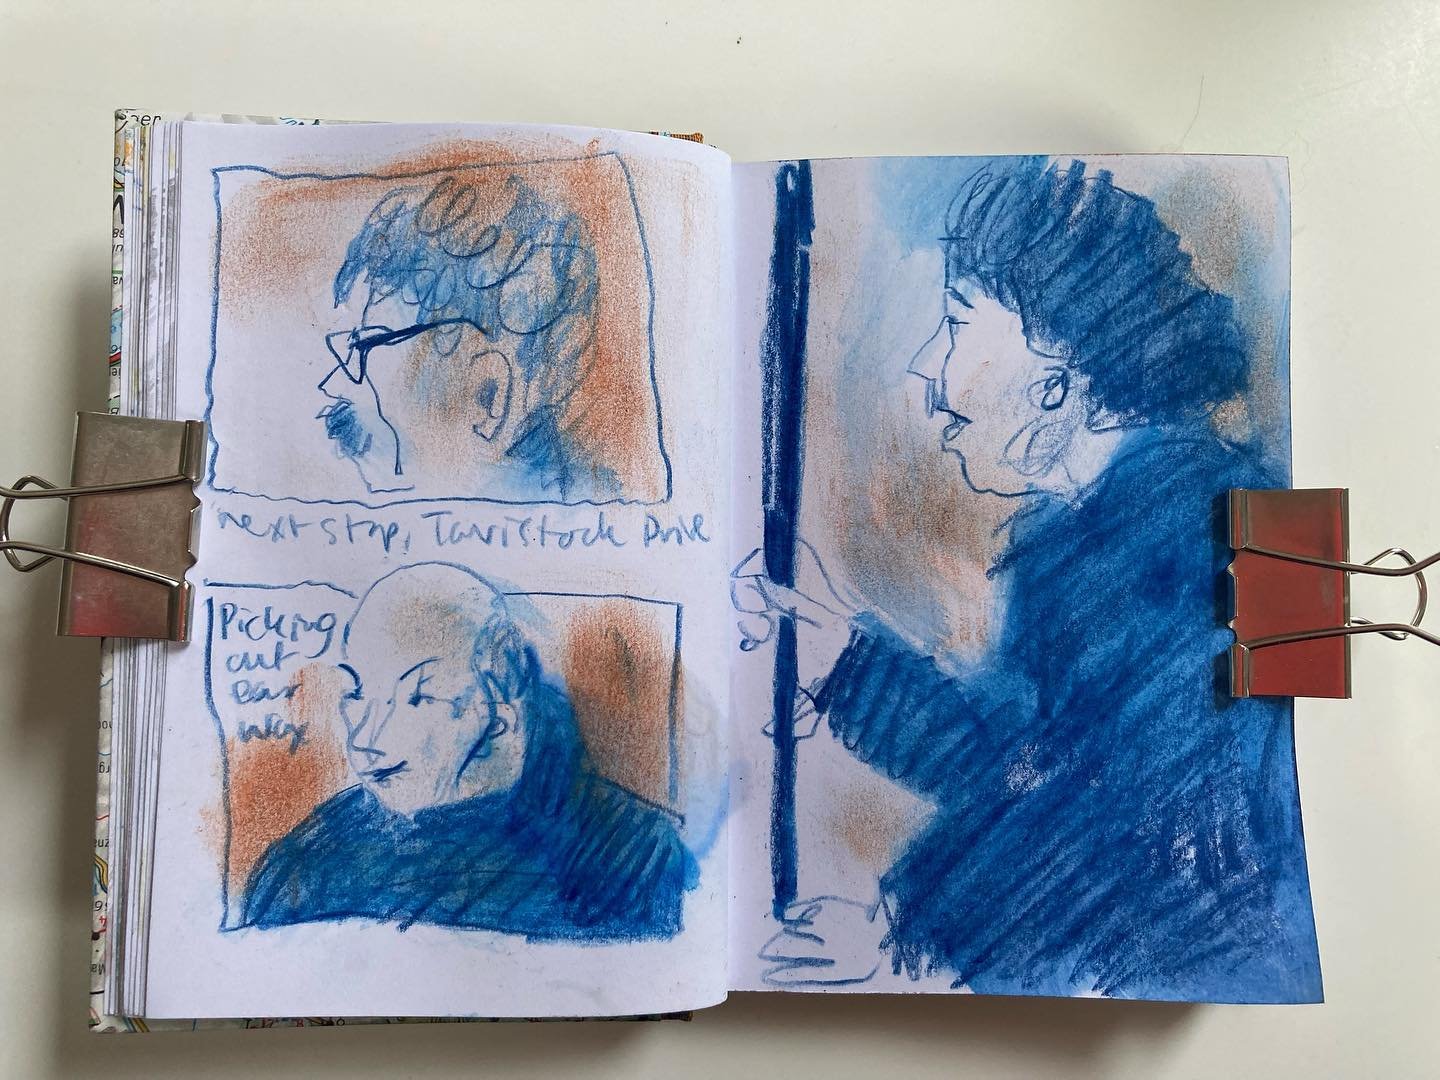 Some quick bus drawings from yesterday tidied up a bit today&hellip;.

#drawdrawdraw #draweveryday
#drawnfromlife
#sketchbookpage
#dailysketch #sketchdaily #dailydrawing #observationaldrawing 
#sketchbookpage
#walktosee #pleinair
#reportagedrawing #d